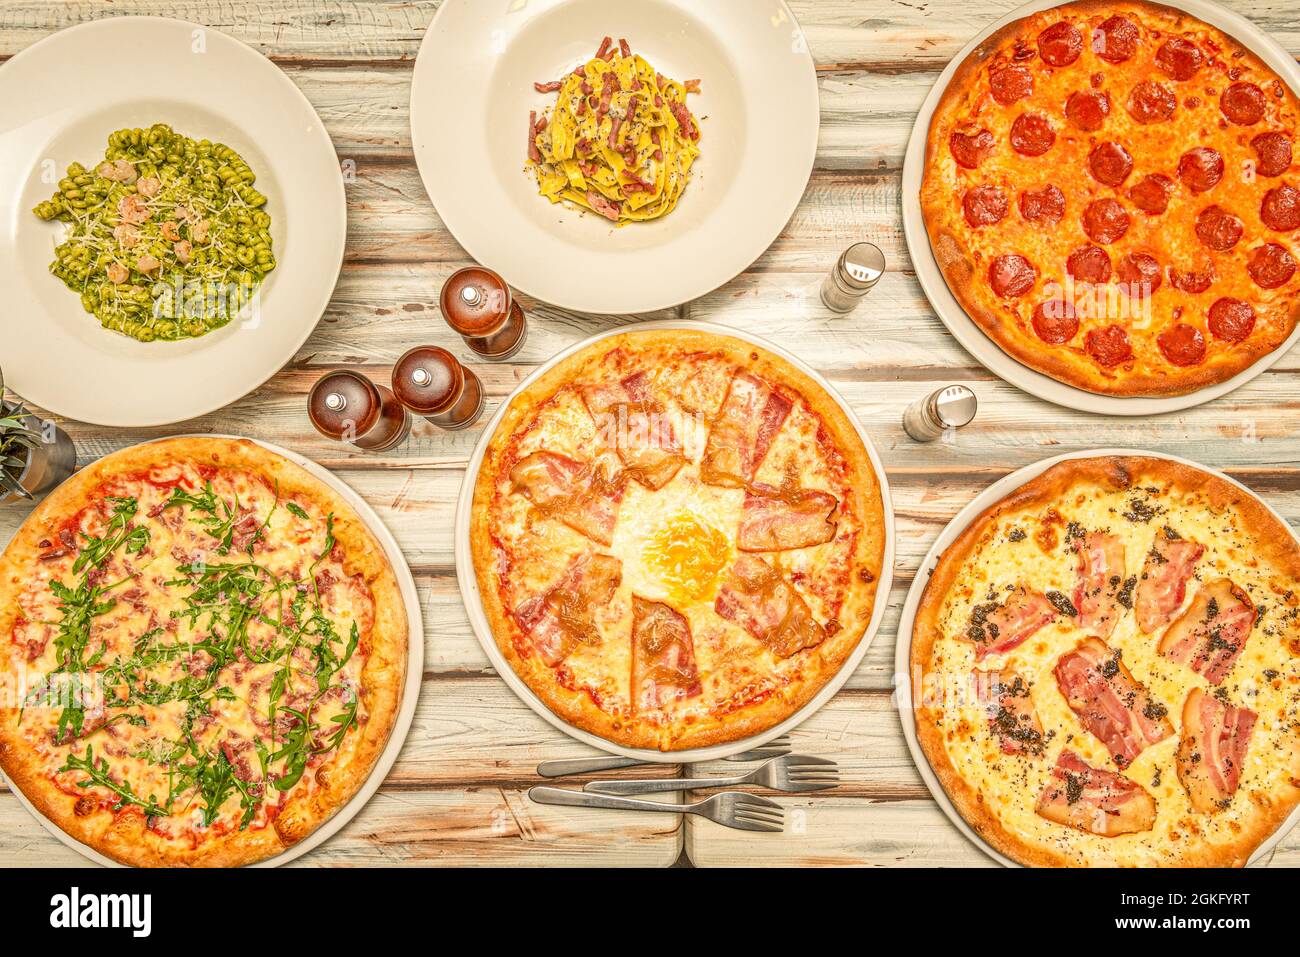 Top view of Italian pasta dishes and typical pizzas with guanciale and pepperoni on wooden table Stock Photo